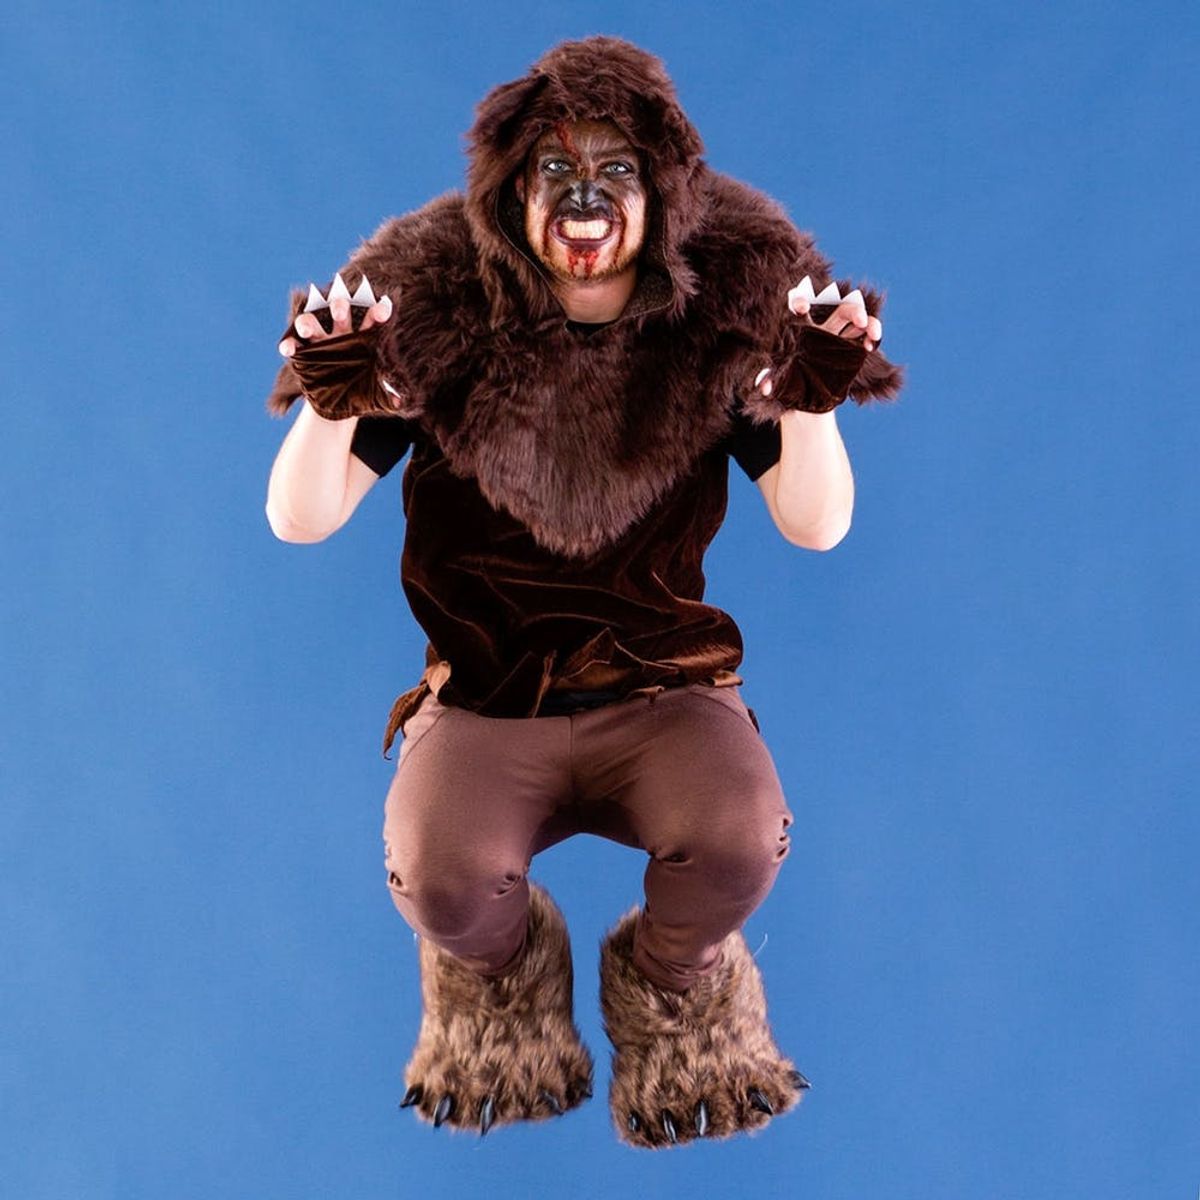 Tap into Your Animal Instincts With This DIY Bear Costume